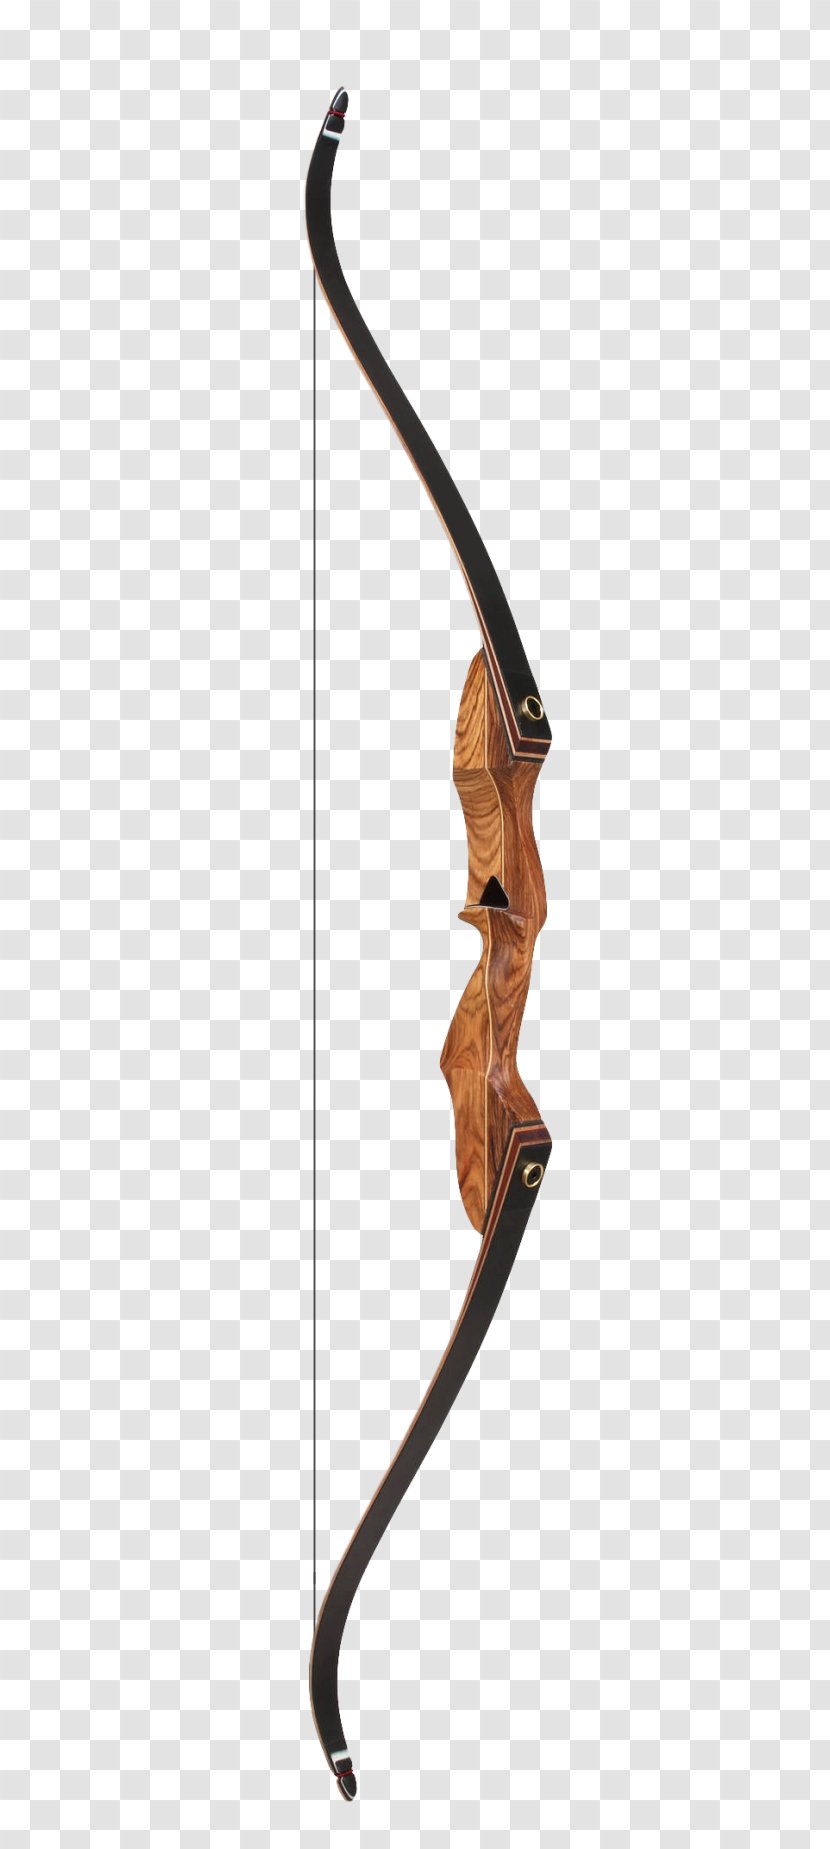 Bow And Arrow Weapon Recurve - Archery Transparent PNG